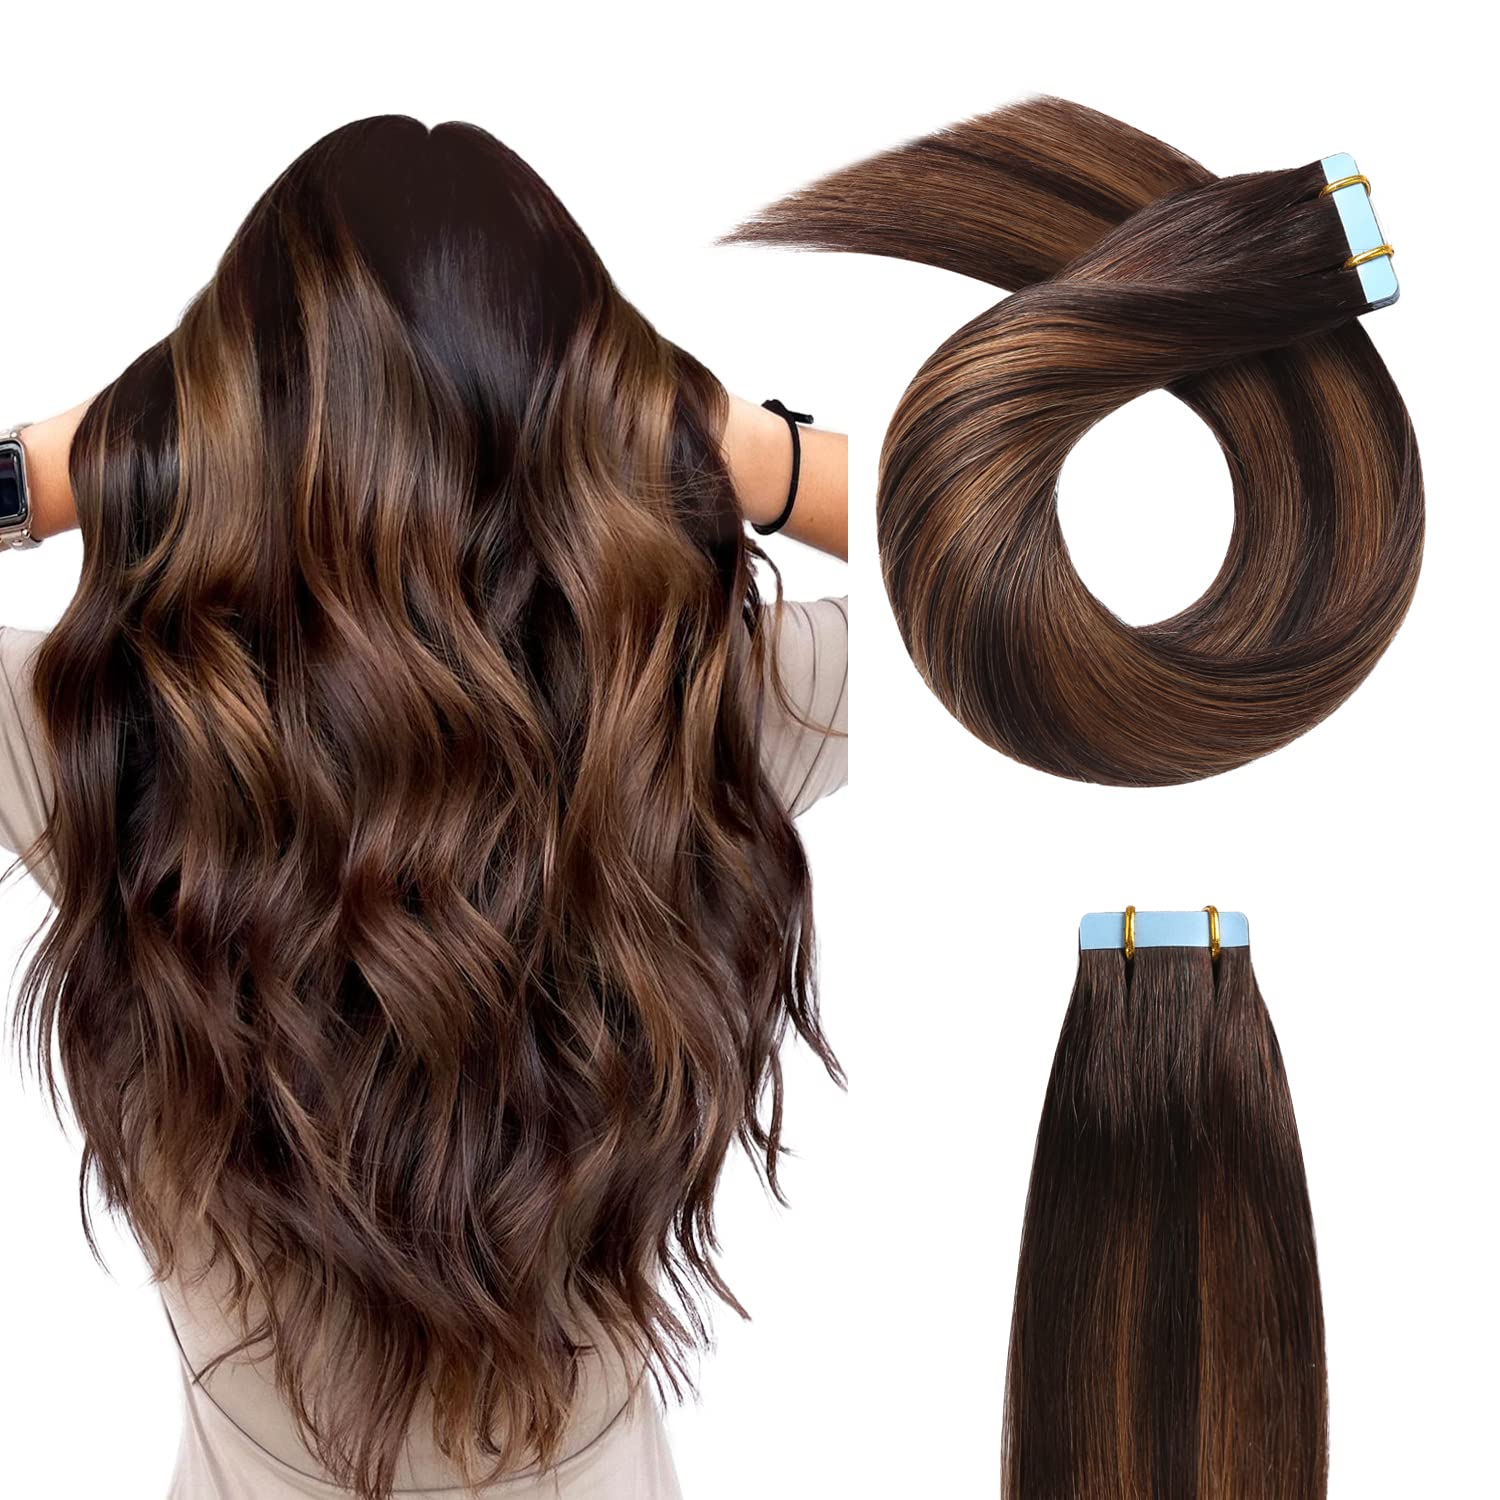 YILITE Tape in Hair Extensions Human Hair 12inch - 24 inch #2-6-2 20pcs 50Gram Balayage Darkest Brown Roots Fading to Dark Brown and Chestnut Brown Tape in Hair Extensions Remy Human Hair